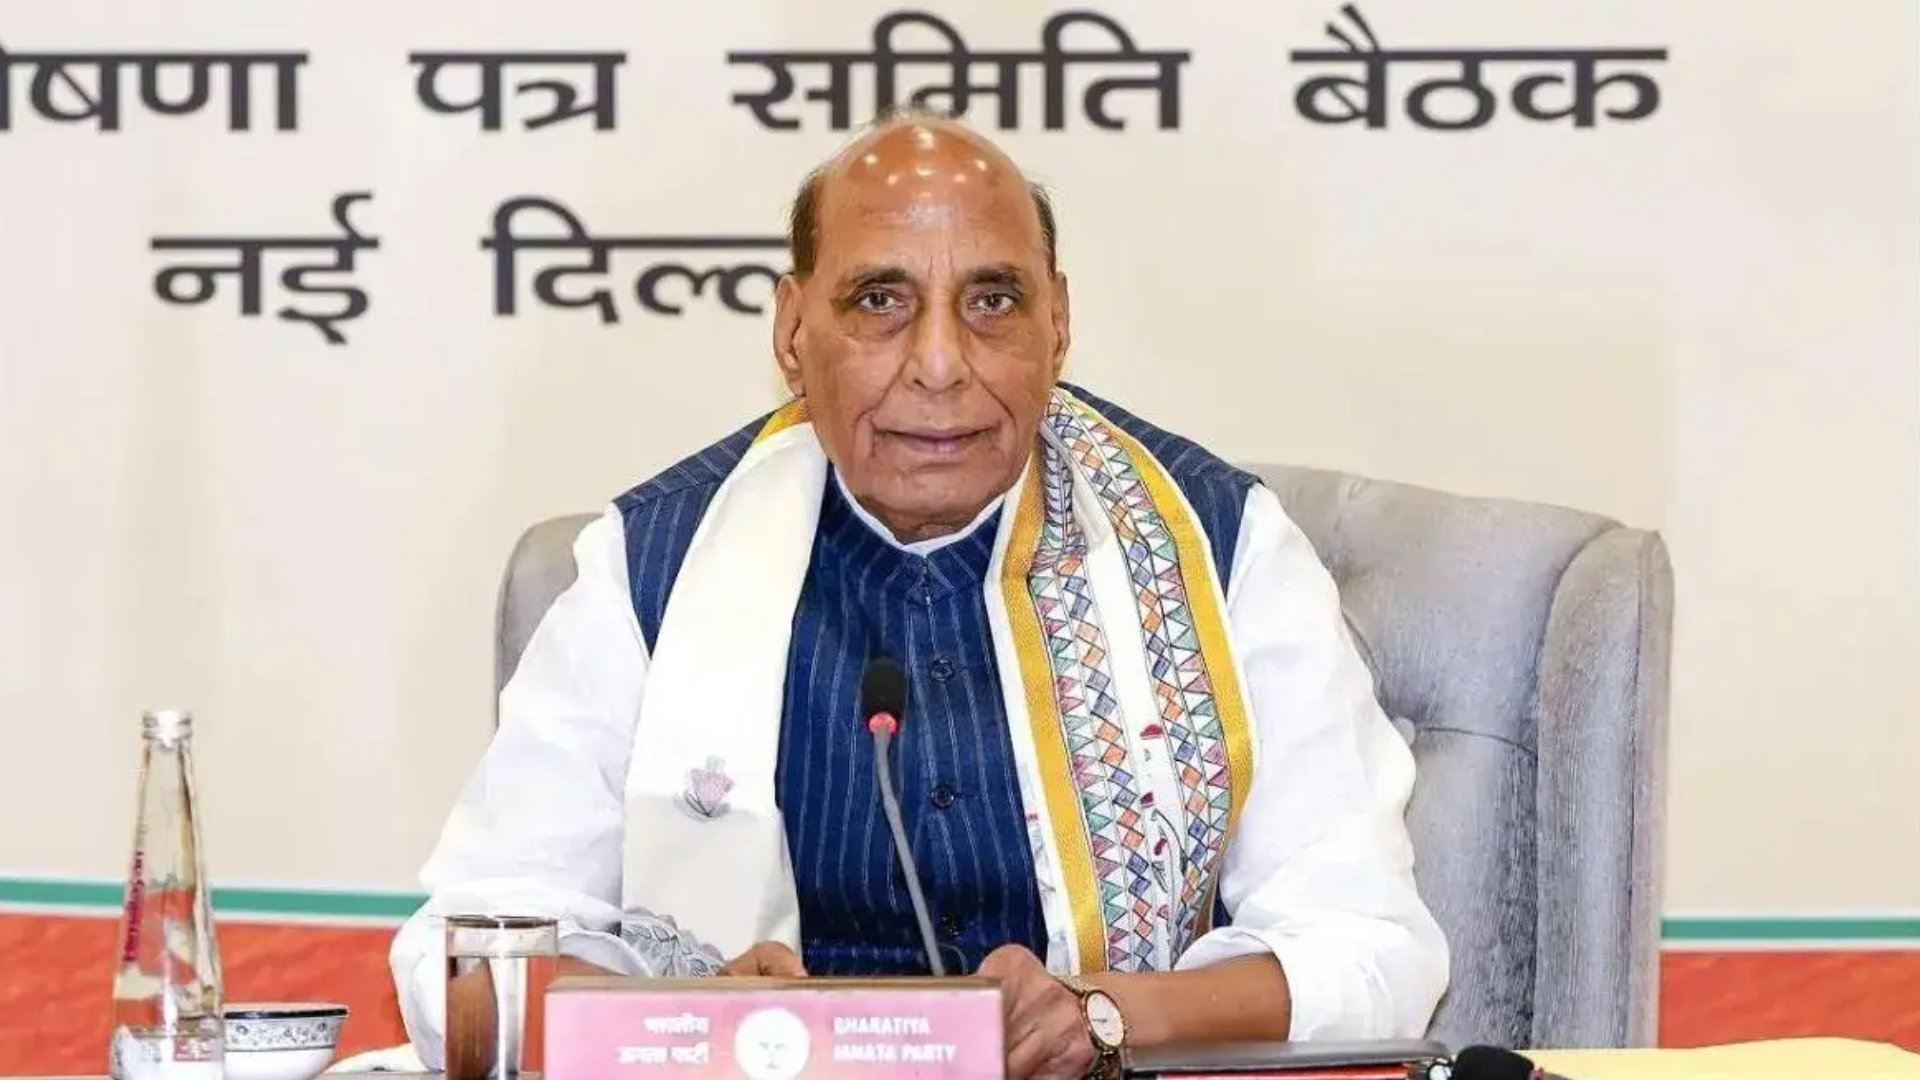 Defence Minister Rajnath Singh Files Nomination for Lucknow Lok Sabha Seat, Receives Support from Chief Ministers